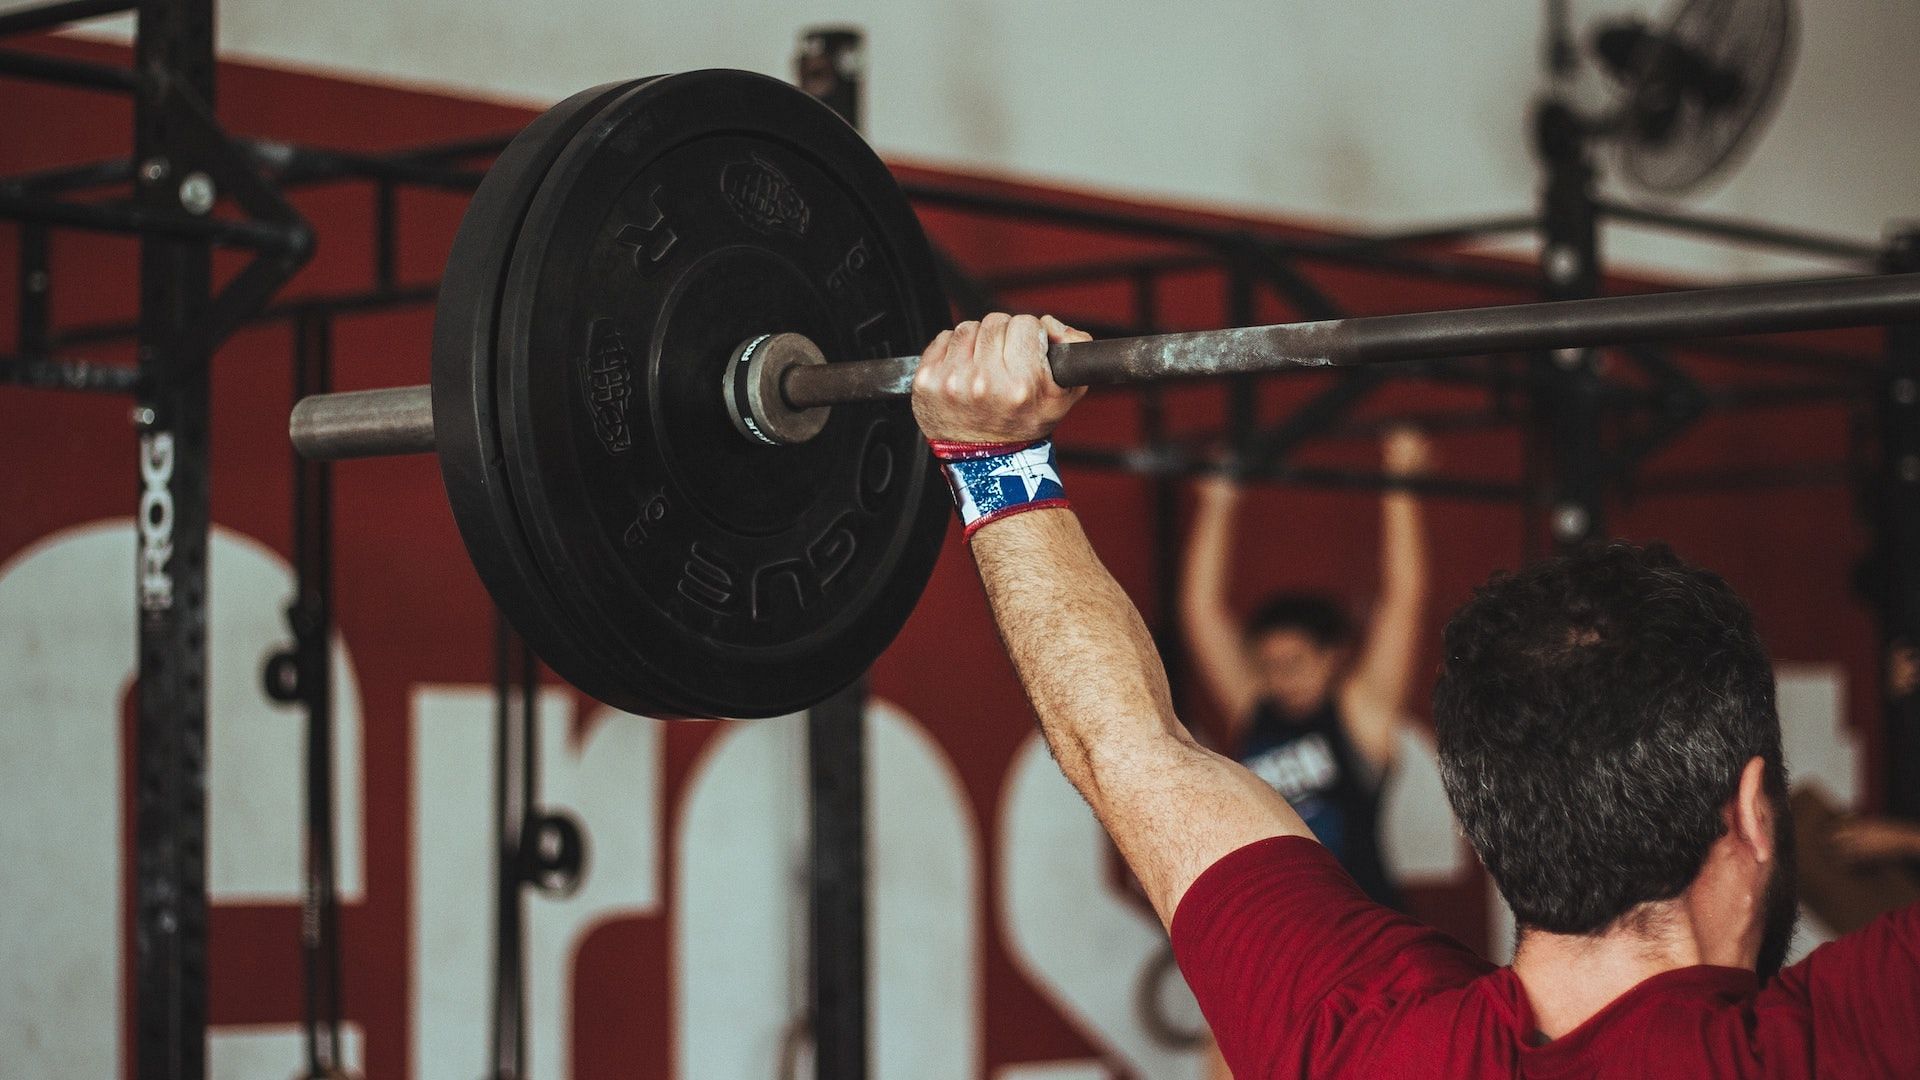 There are many exercises to help you lift better. (Image via Unsplash/ Victor Freitas)